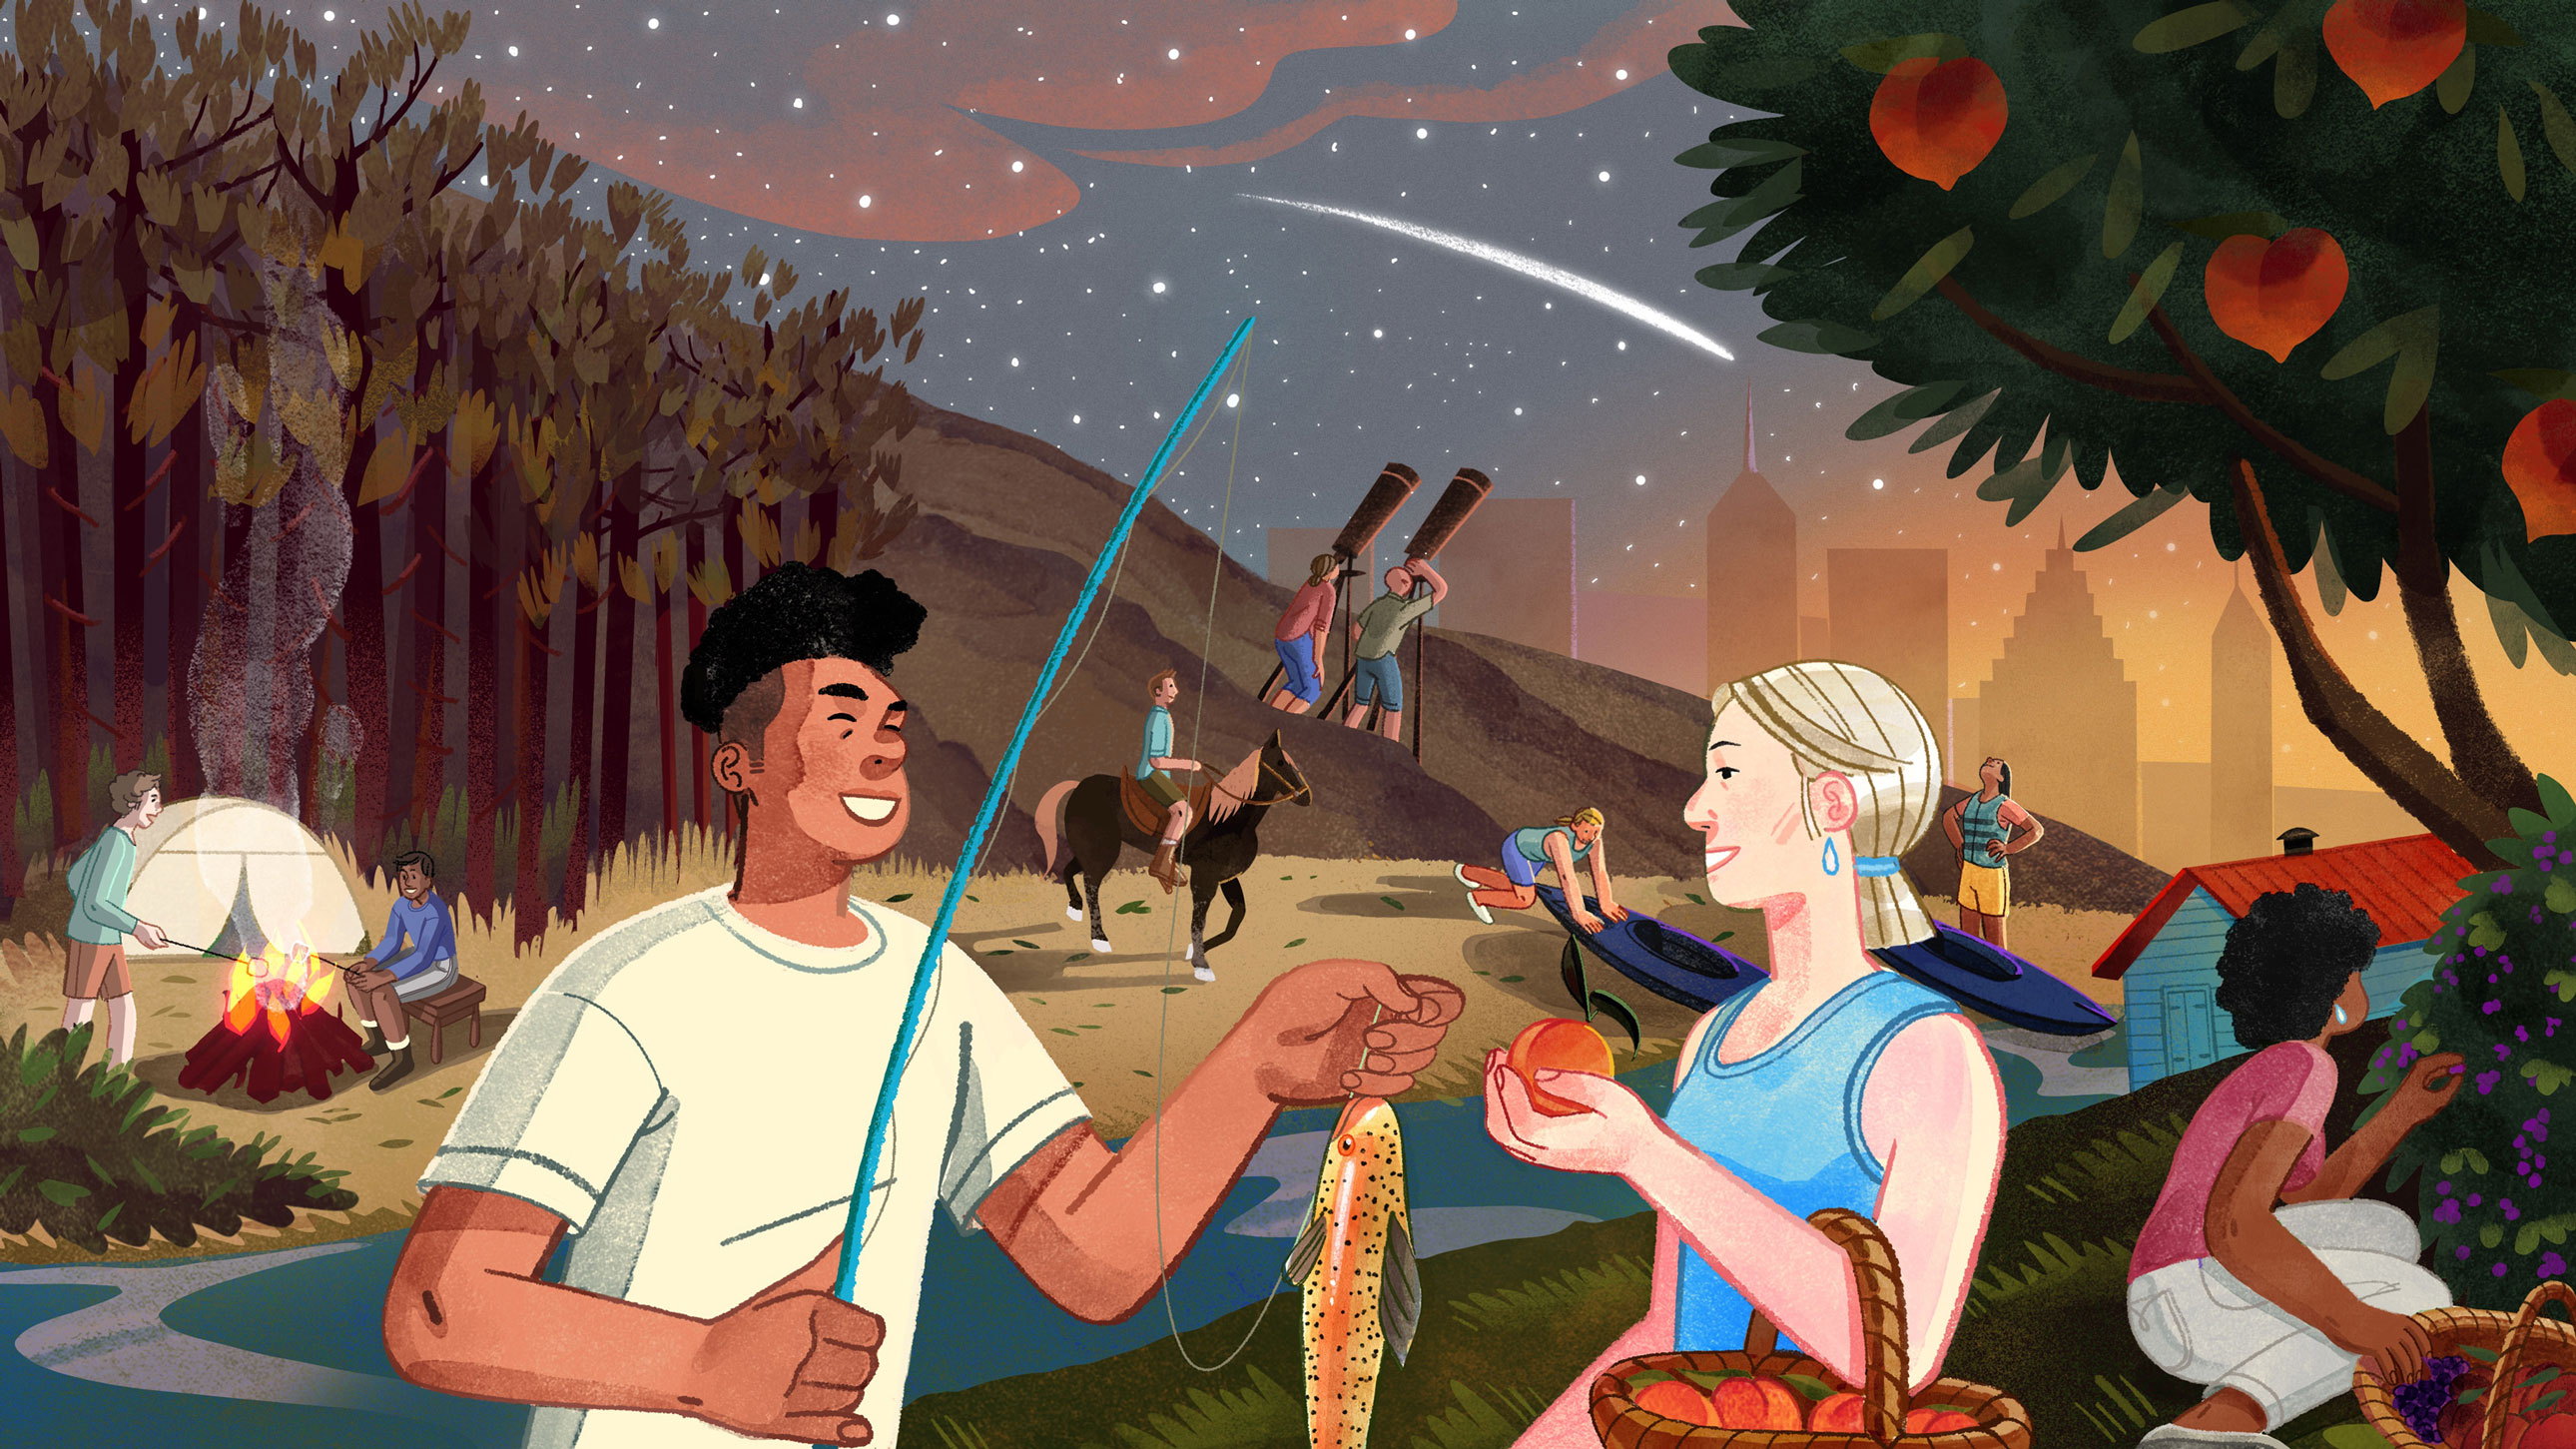 An illustration of two people, one holding a fishing pole and trout, another holding a freshly picked peach. People in the background are enjoying other outdoor activities, with a shooting star and Atlanta skyline in the distance.